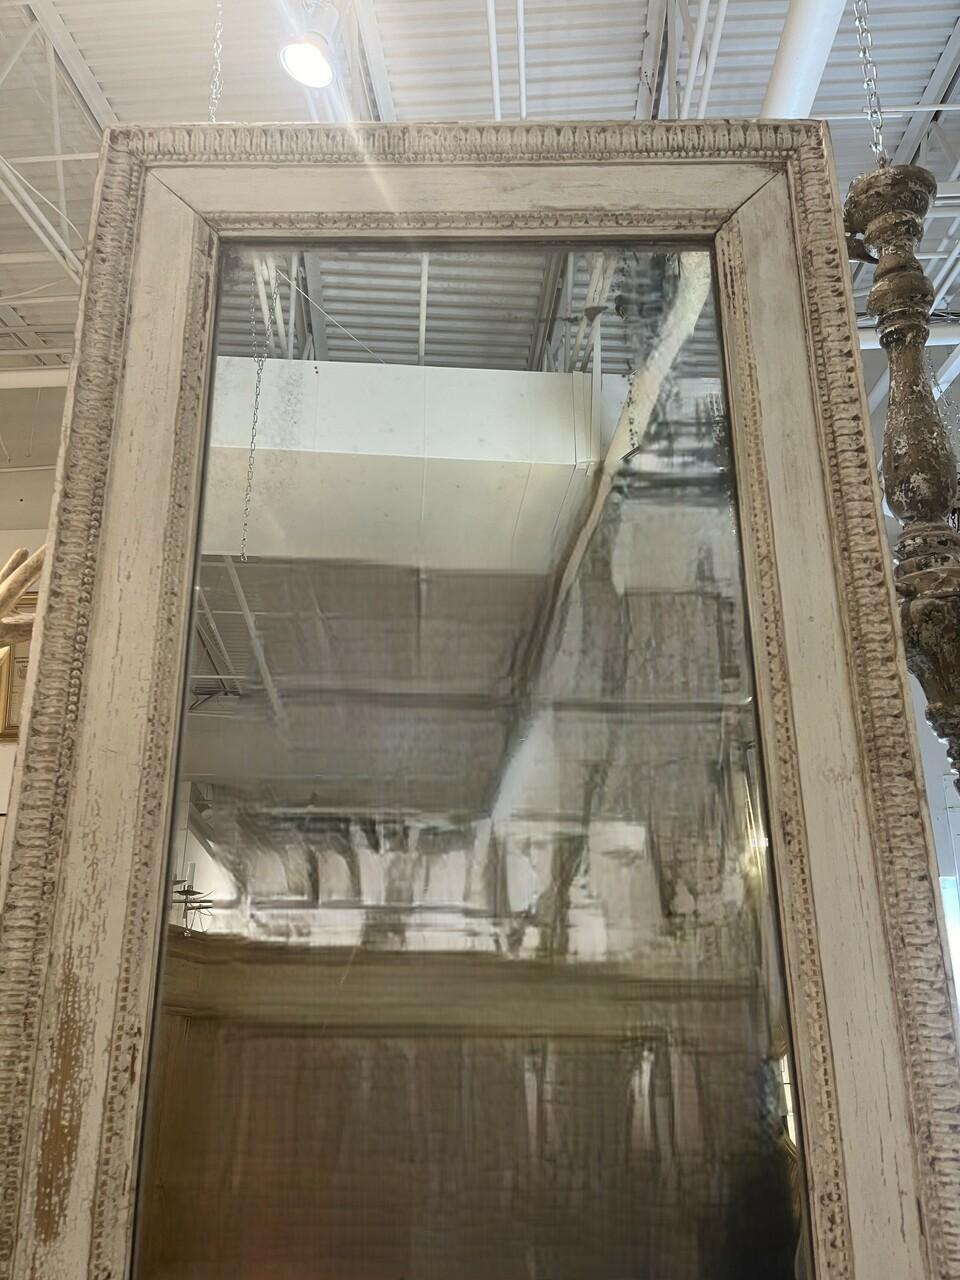 A beautiful piece of history in this hand carved and painted 19th century French mirror. An amazing nine feet tall with nice patina on mirror as well as the carved frame. Some paint loss and chips as to be expected with age.